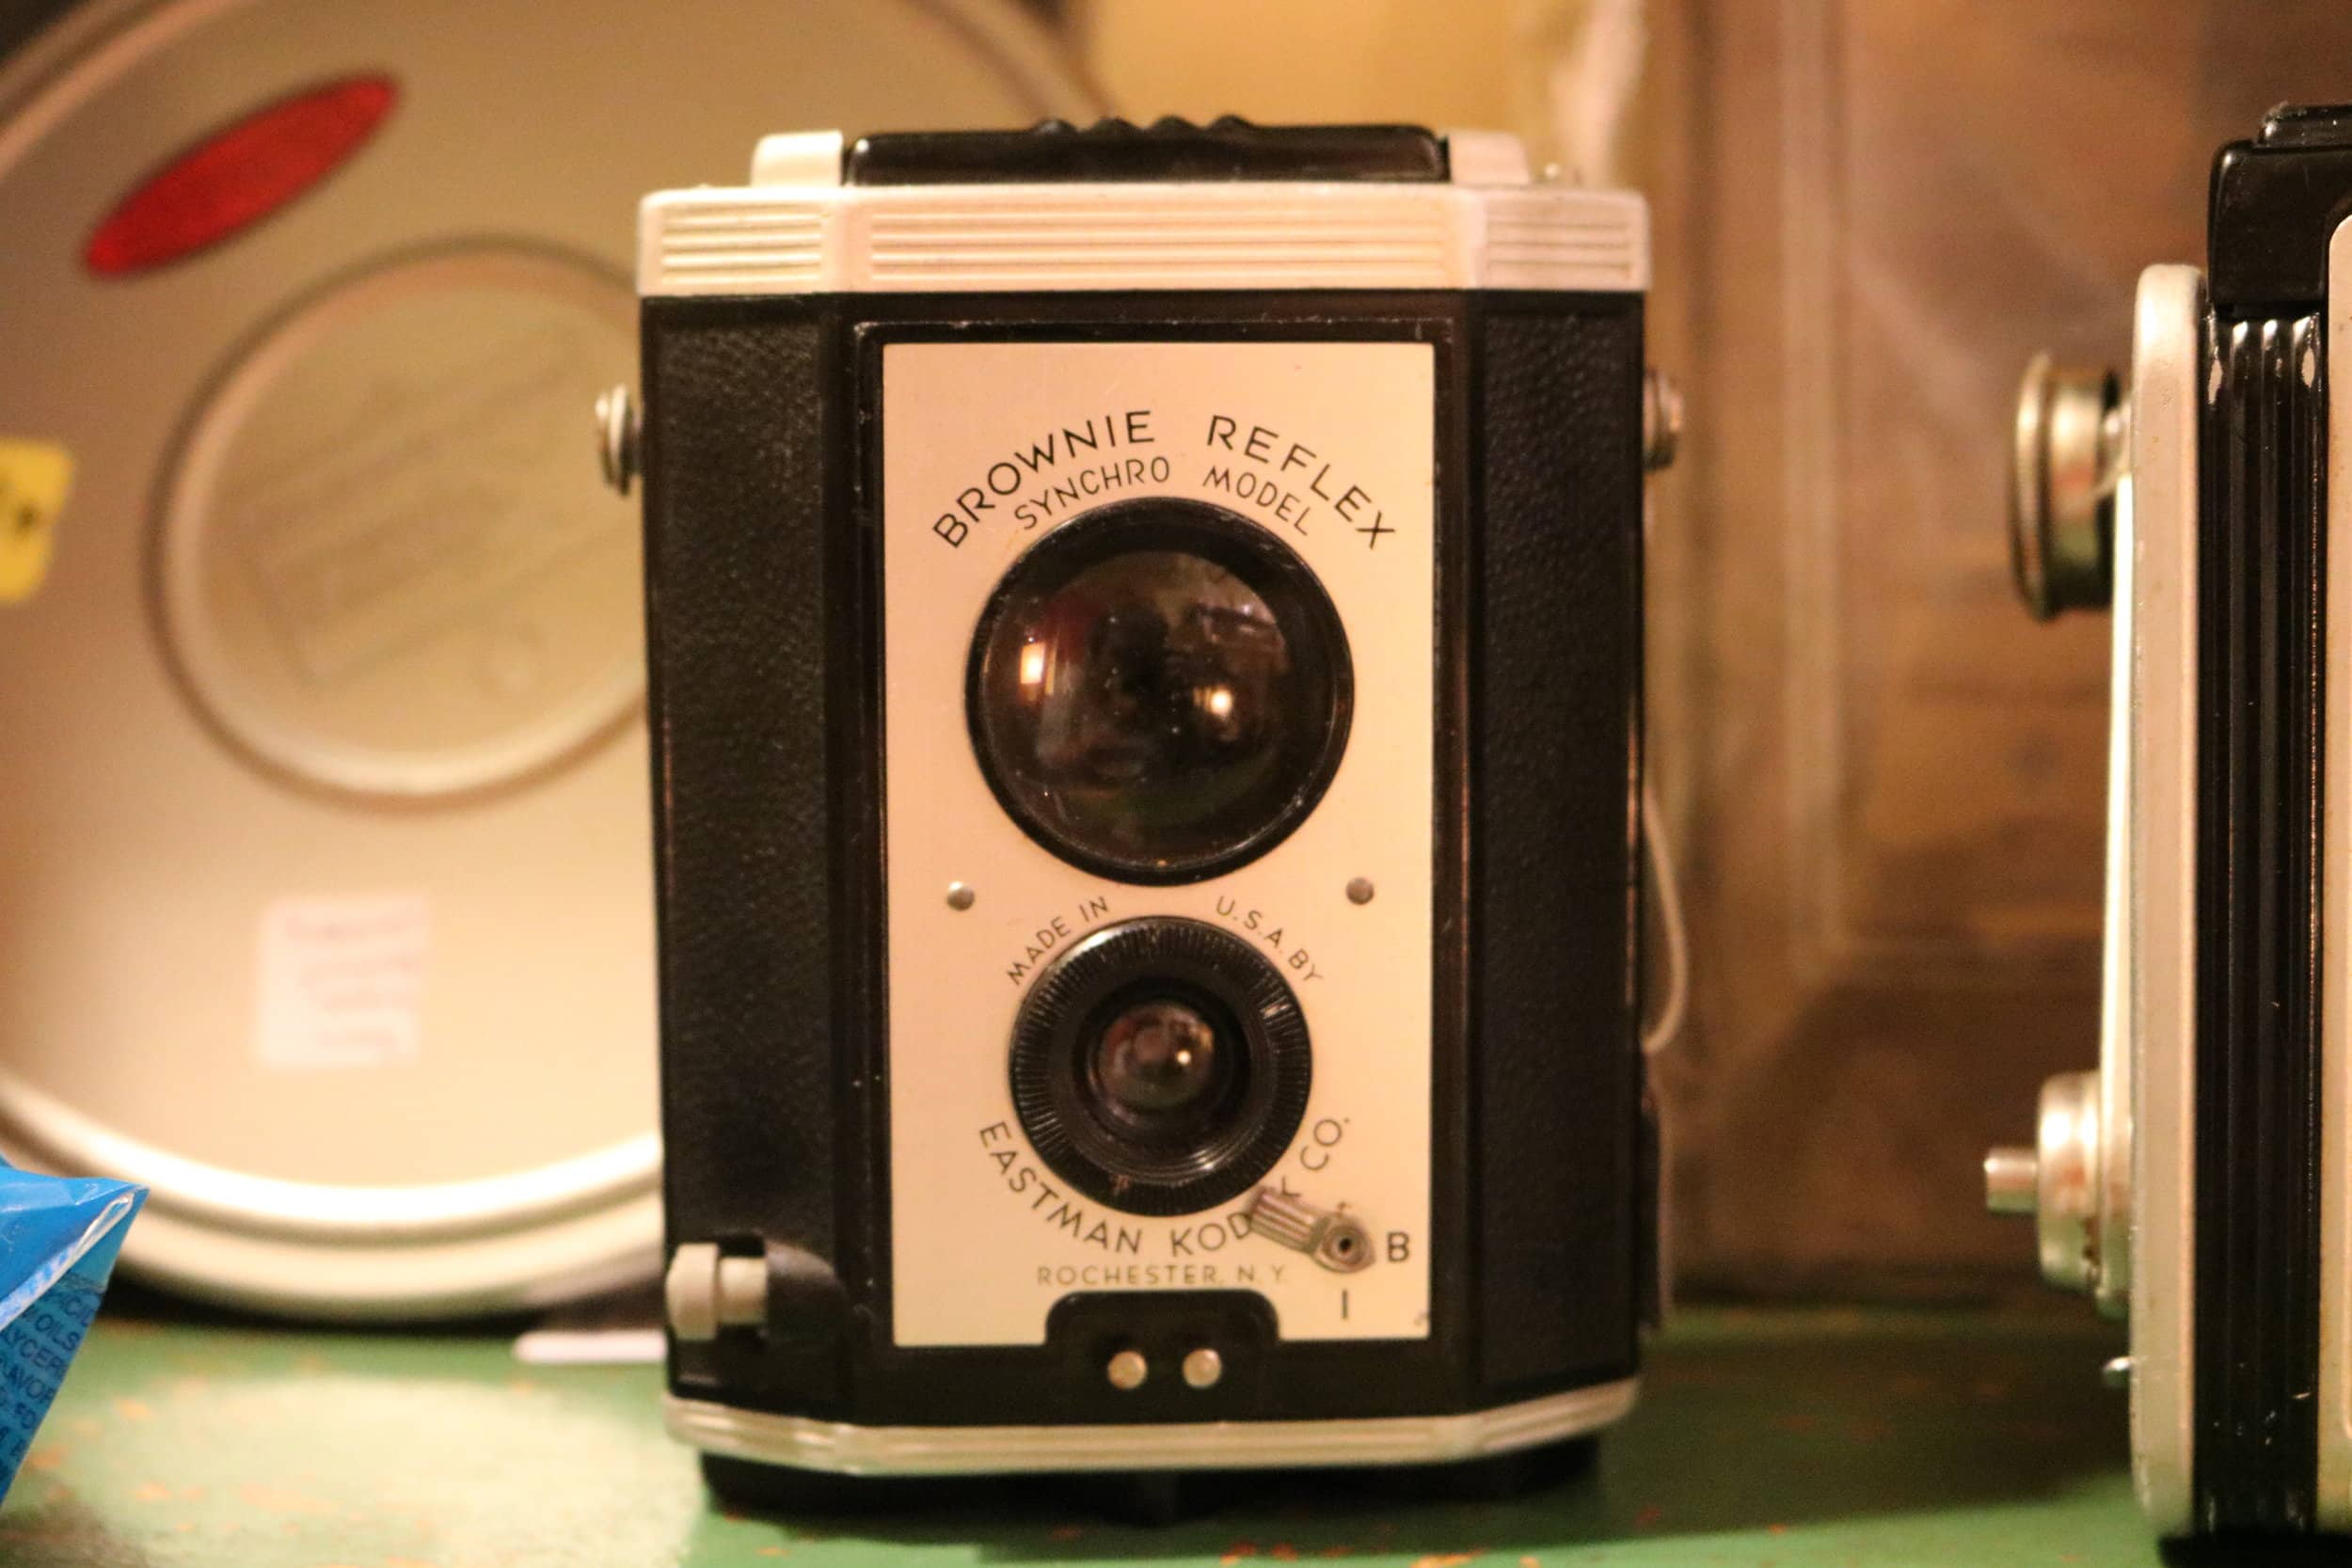 An old Kodak Brownie Reflex camera from the 1940s-1950s for sale (I actually bought this one because its really cool).